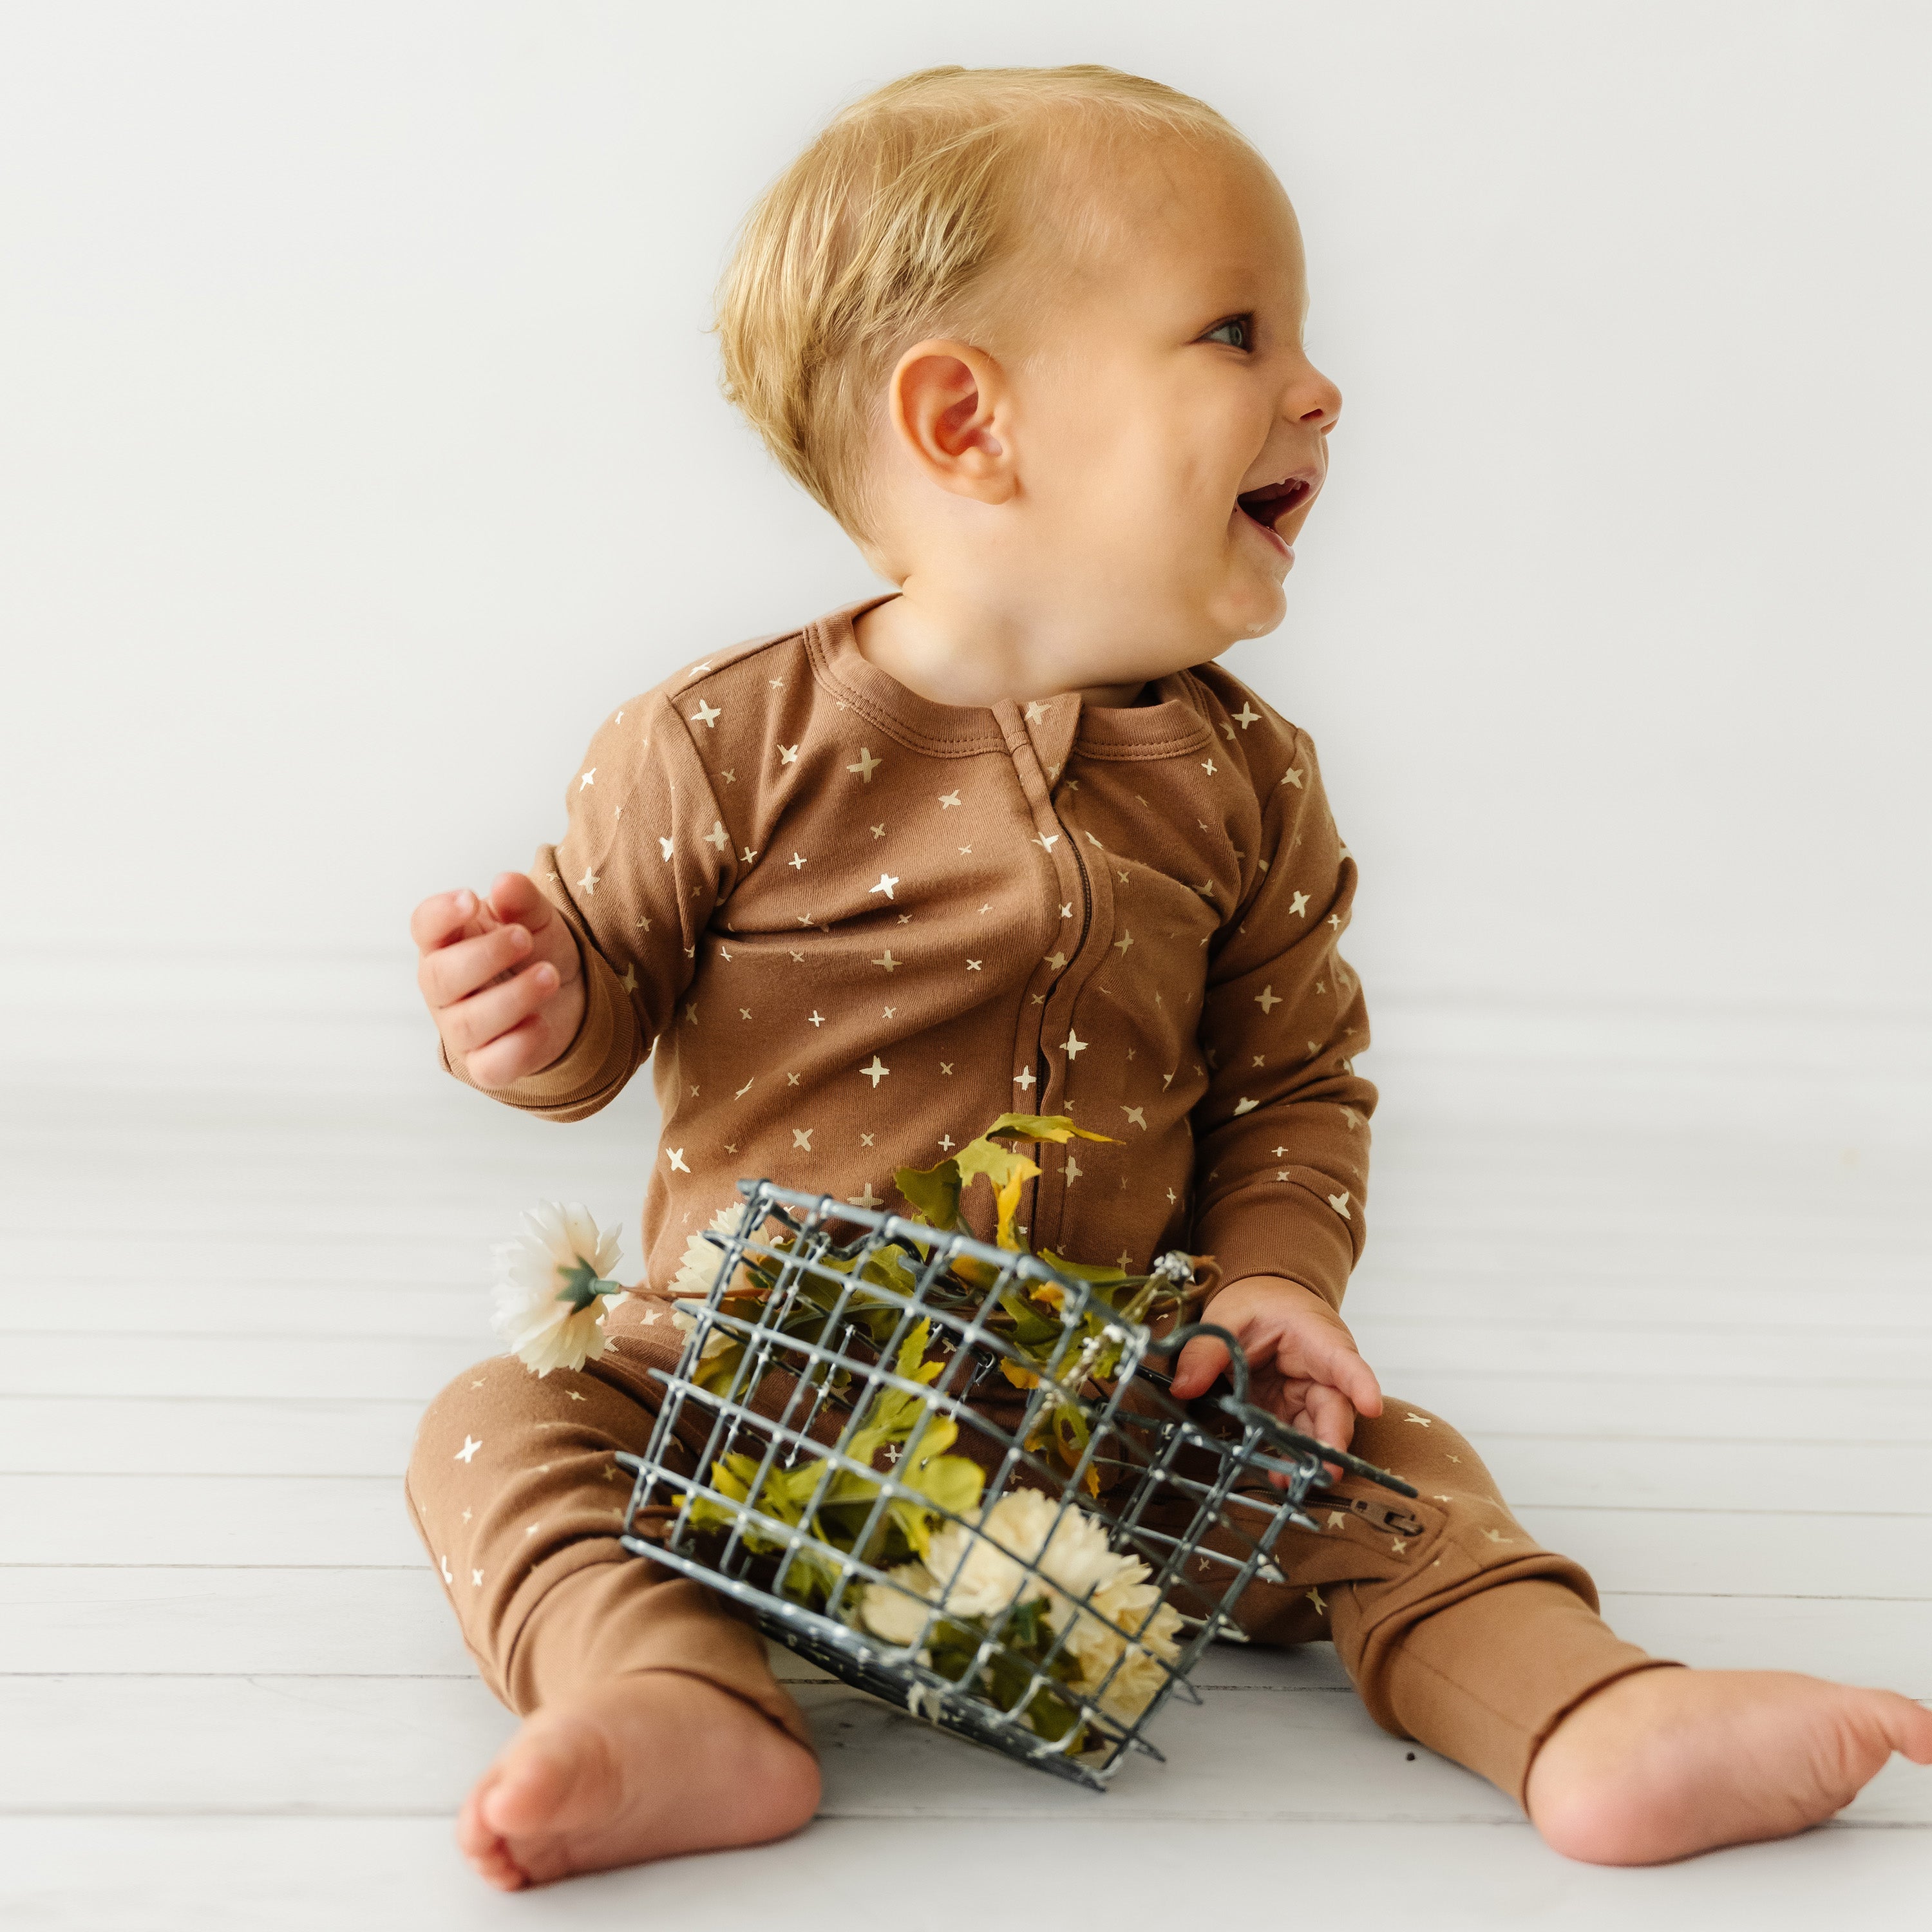 A joyful baby in an Organic Baby Sparkle brown onesie decorated with stars sits on a white background, holding a small wire basket filled with yellow flowers, looking off to the side with a bright smile.